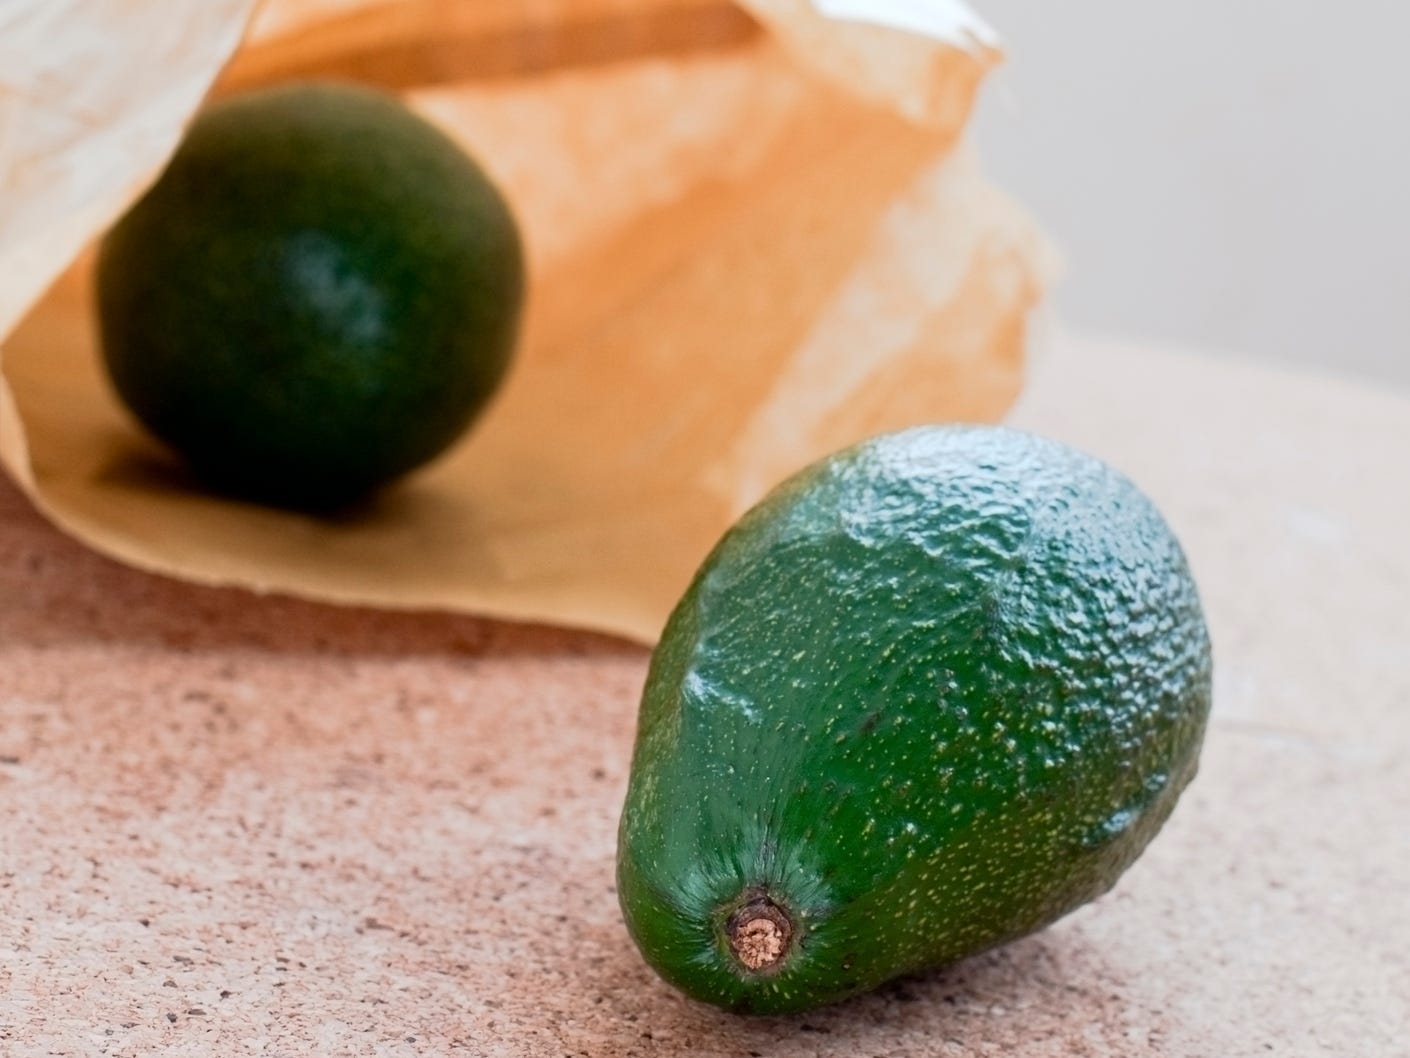 An avocado in a paper bag with another avocado in the foreground